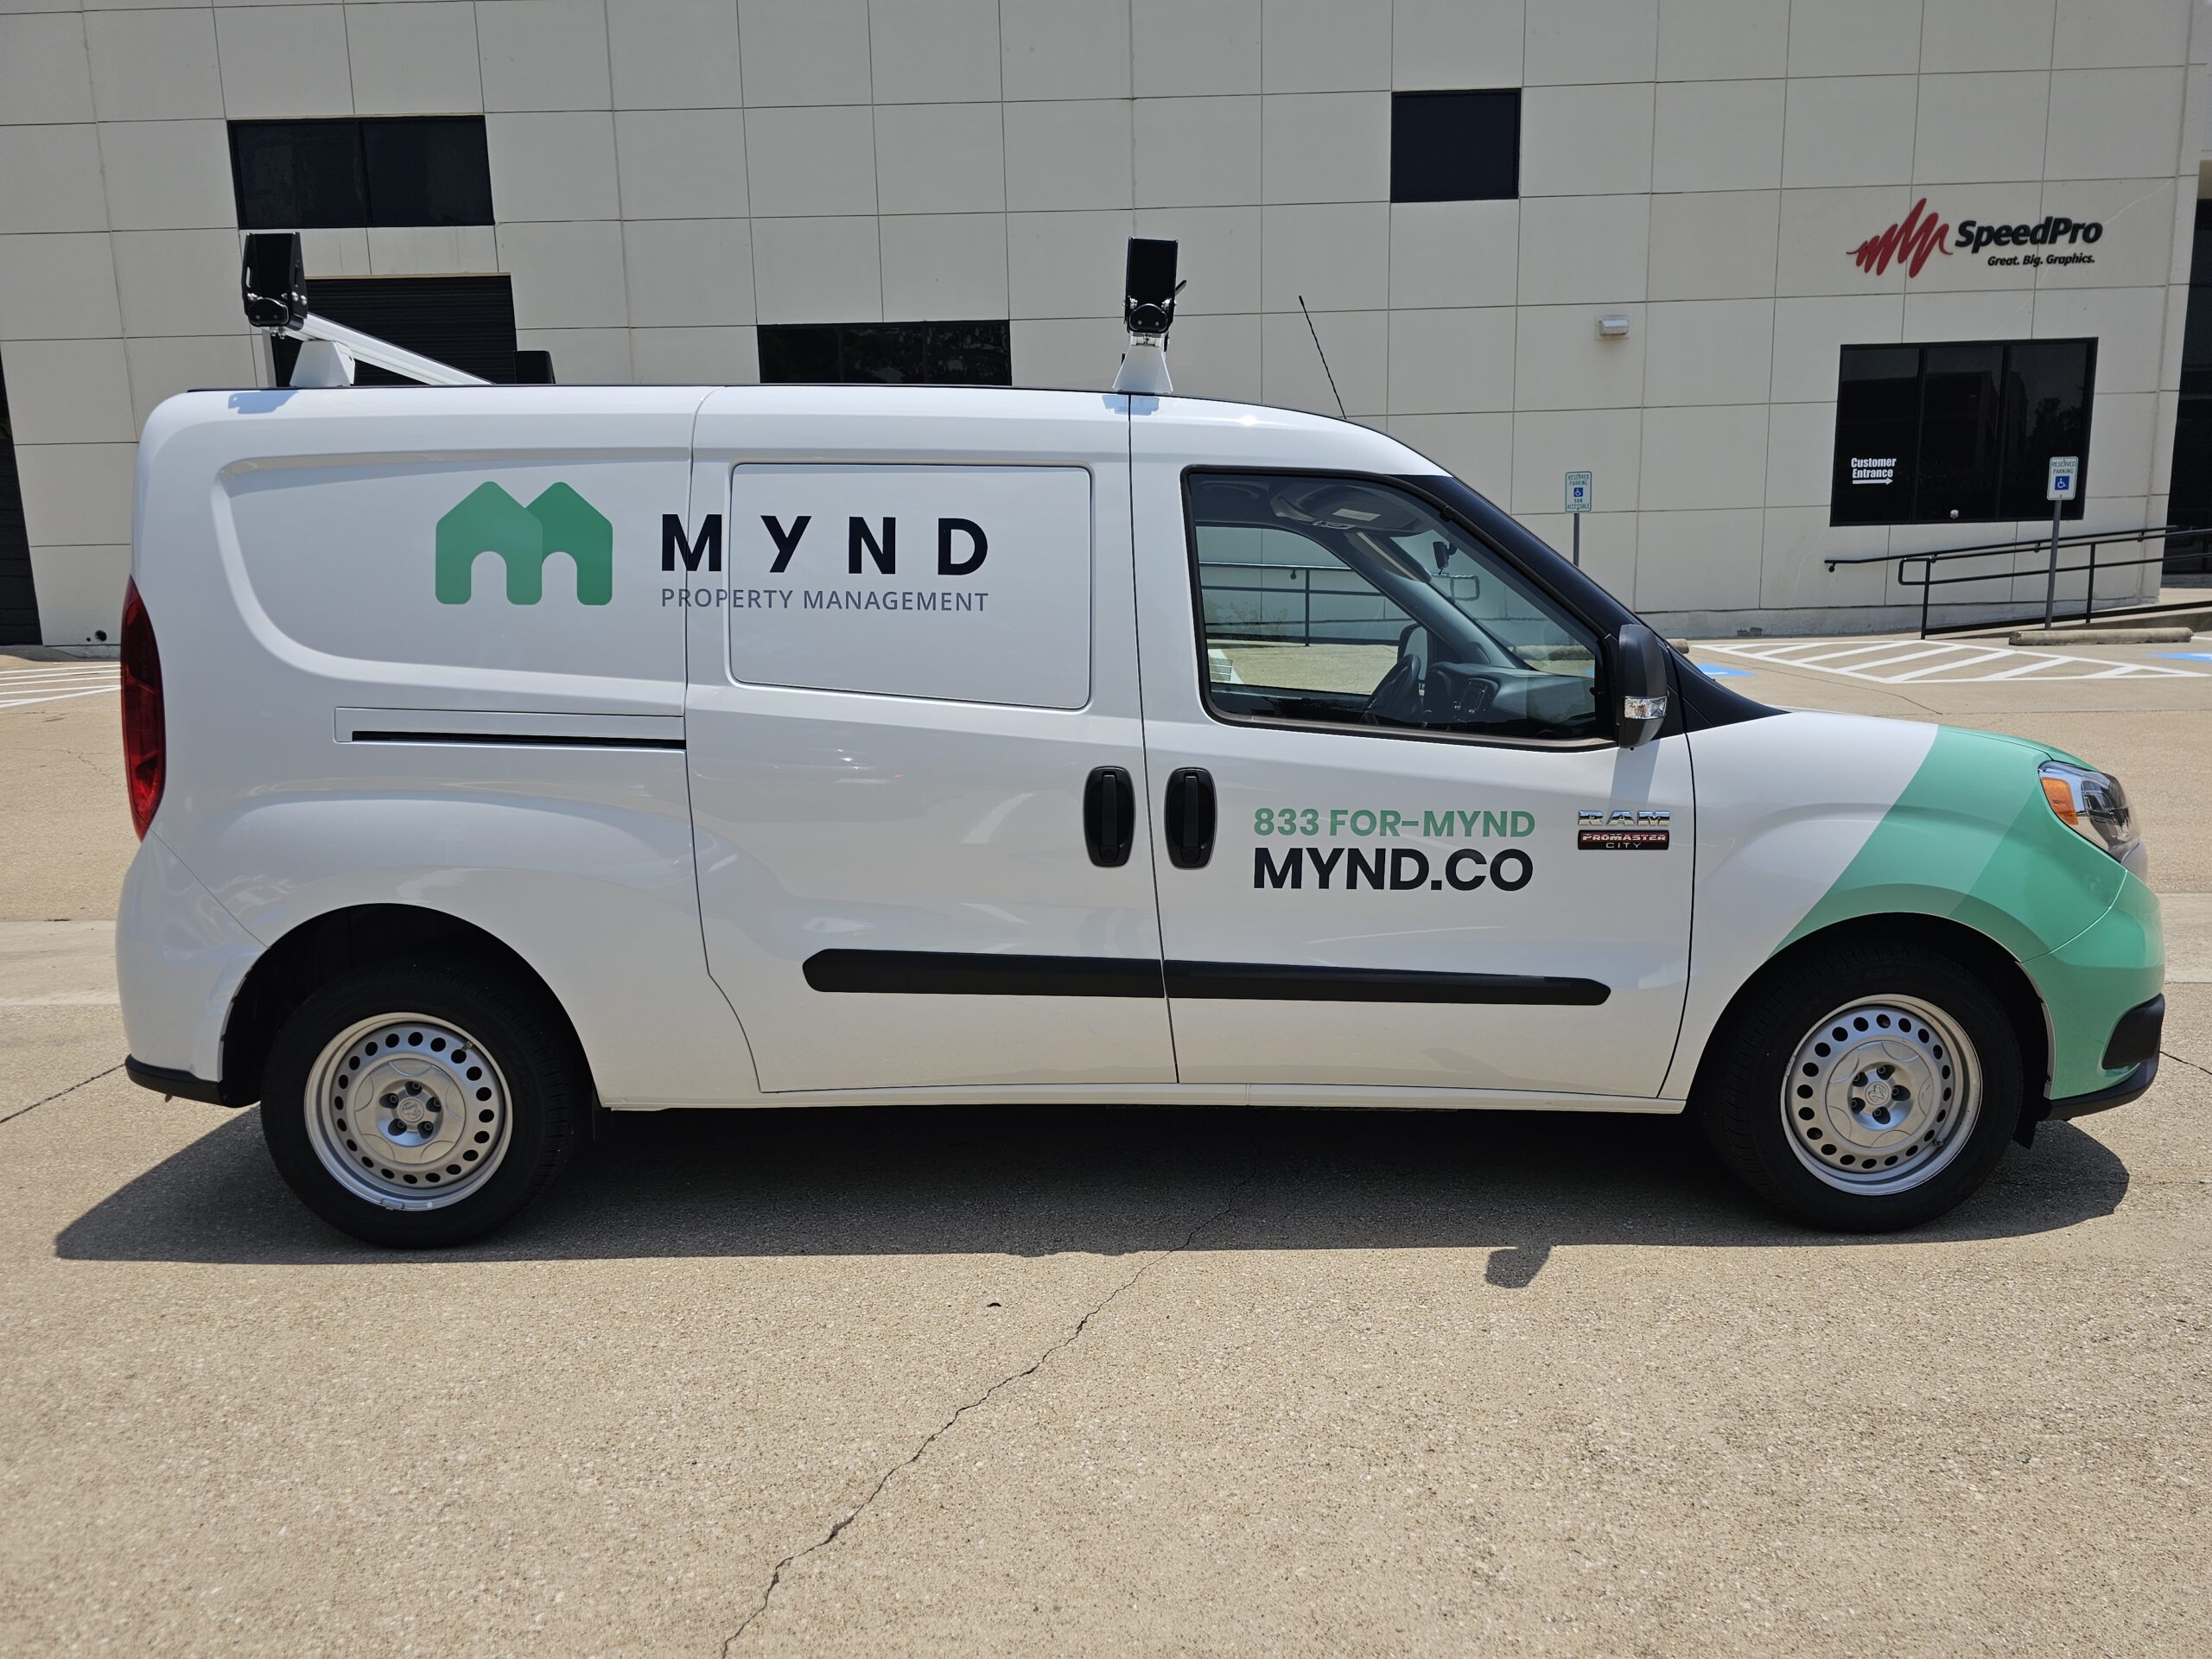 Right side of a van that is wrapped in green graphics with a logo and promotional text.